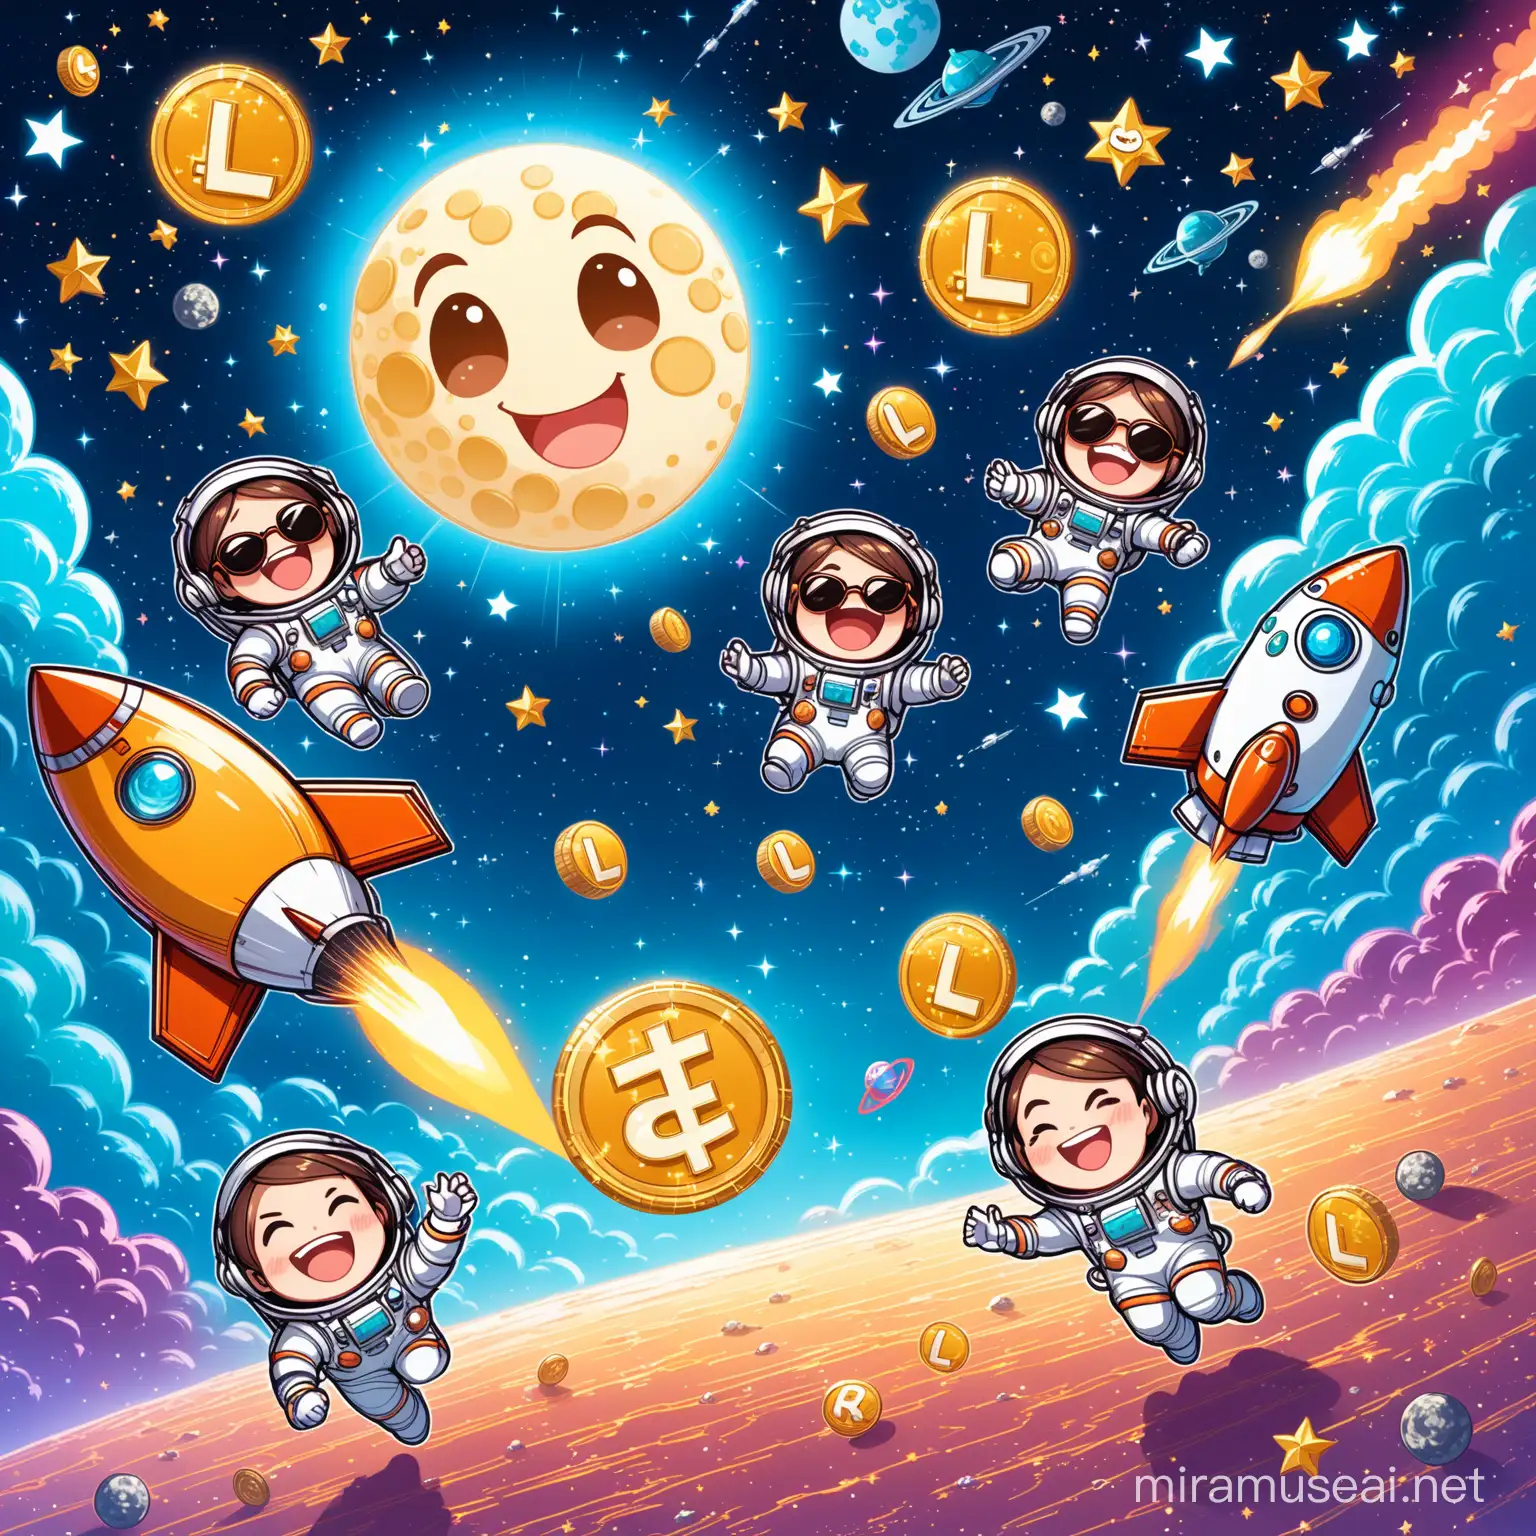 Create an AI-generated image depicting a whimsical lunar landscape, complete with a smiling moon wearing sunglasses and surrounded by stars. In the foreground, include a group of cartoonish astronauts floating around, each holding a cryptocurrency symbol and laughing hysterically. Sprinkle in some rocket ships blasting off in the background, with speech bubbles filled with 'LOL' and other laughter-related expressions. The central focus should be the text 'LunarLolCoin (LOL)' prominently displayed, capturing the playful and humorous spirit of this meme coin